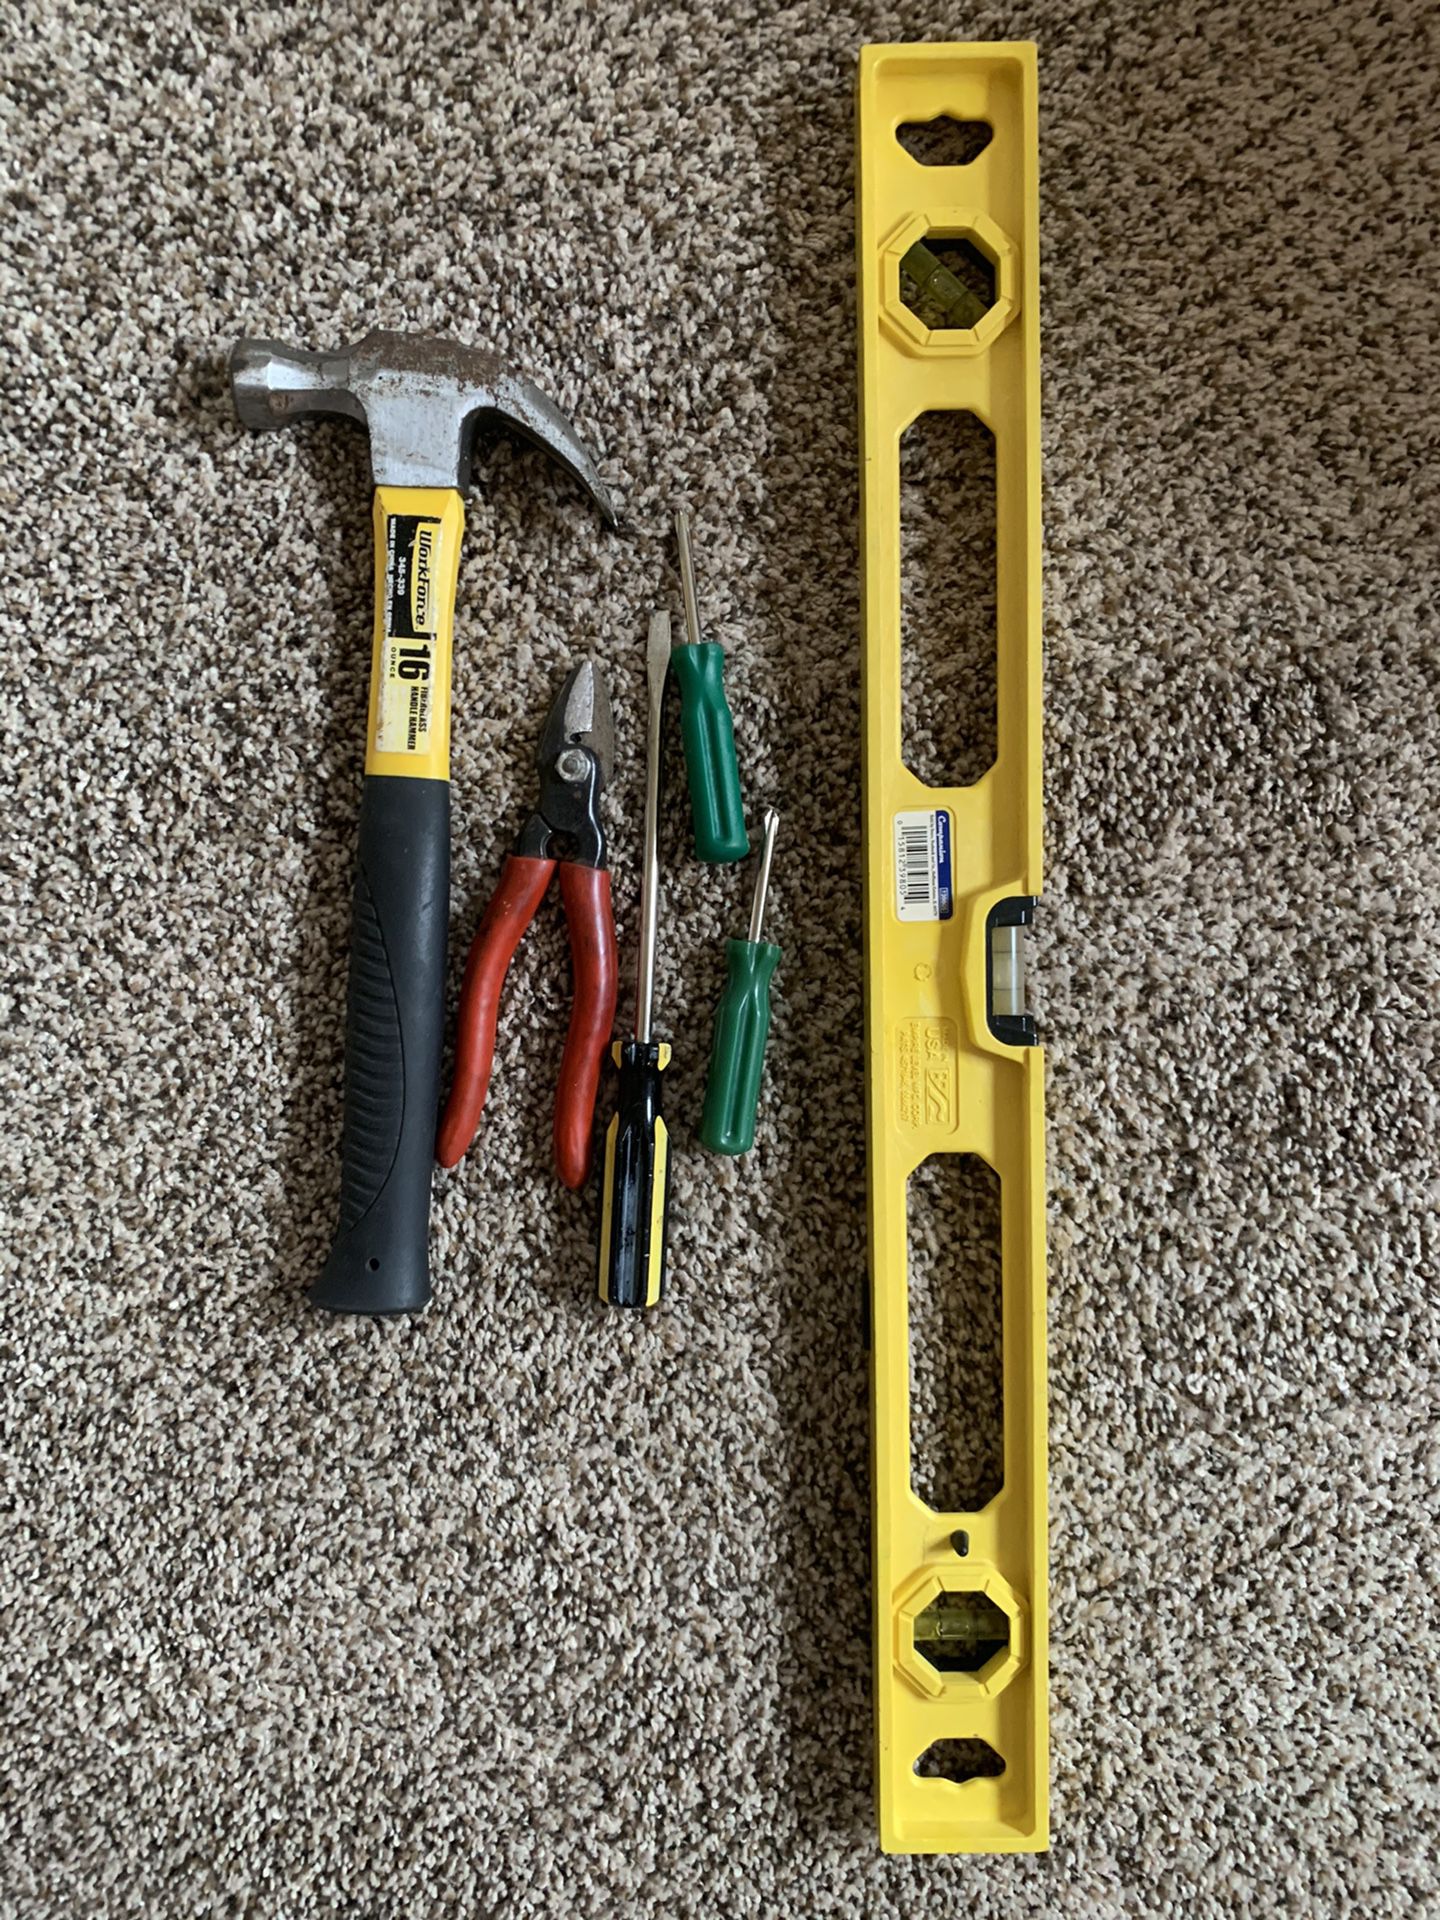 Hammer. Pliers, screwdrivers, level, extension cord (tools)